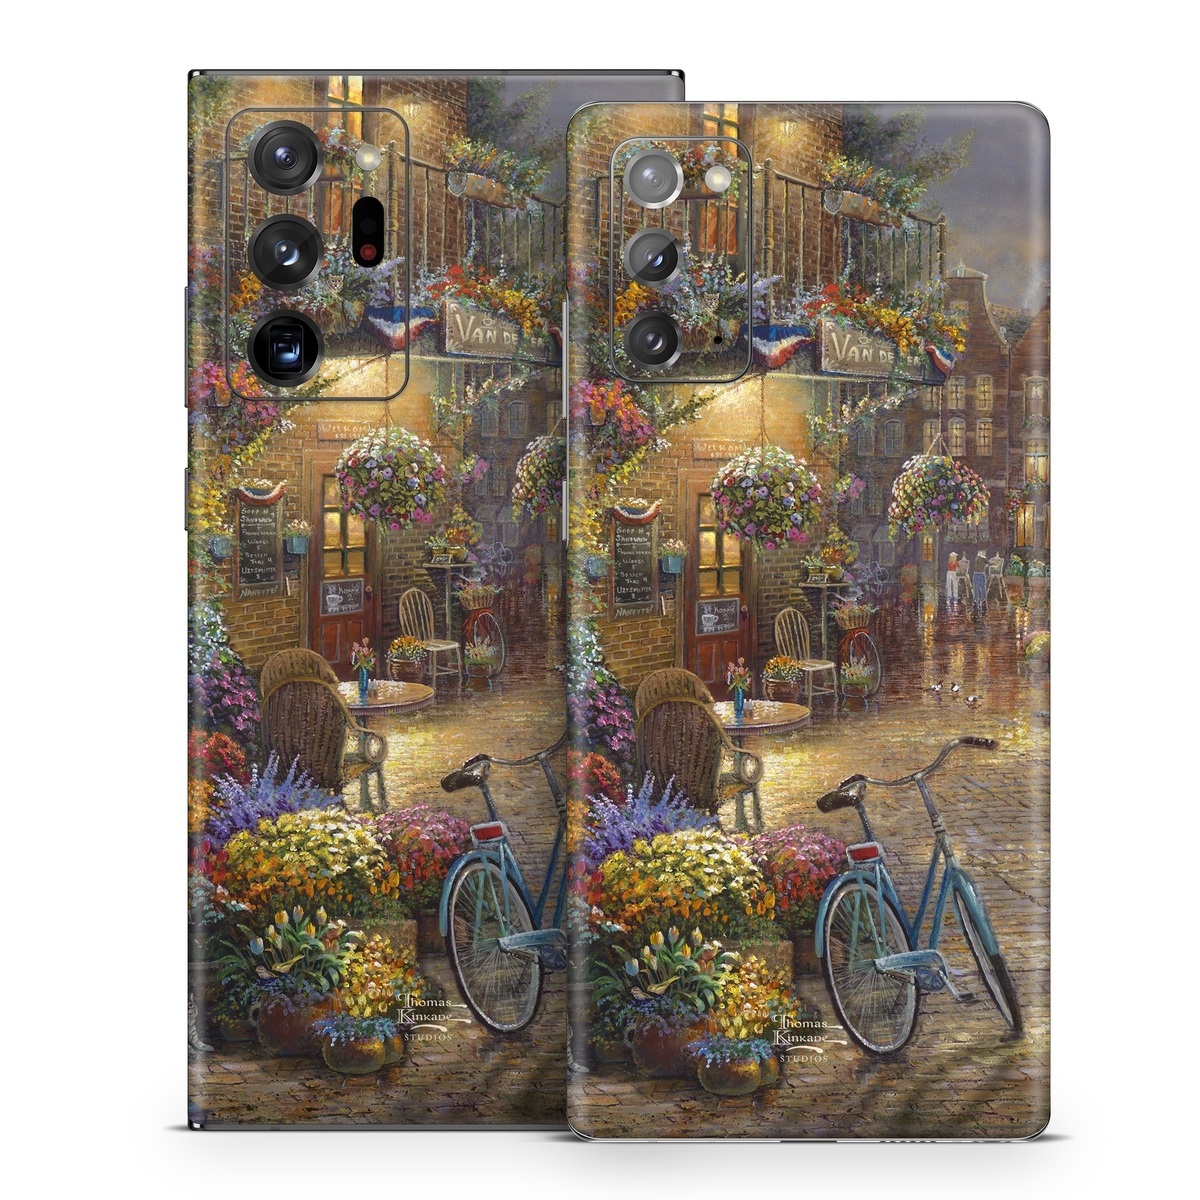 Samsung Galaxy Note 20 Series Skin design of Bicycle, Tire, Wheel, Plant, Bicycle wheel, Sky, Lighting, Tree, Biome, Leisure, with yellow, gray, brown, yellow, red, blue, green, purple colors